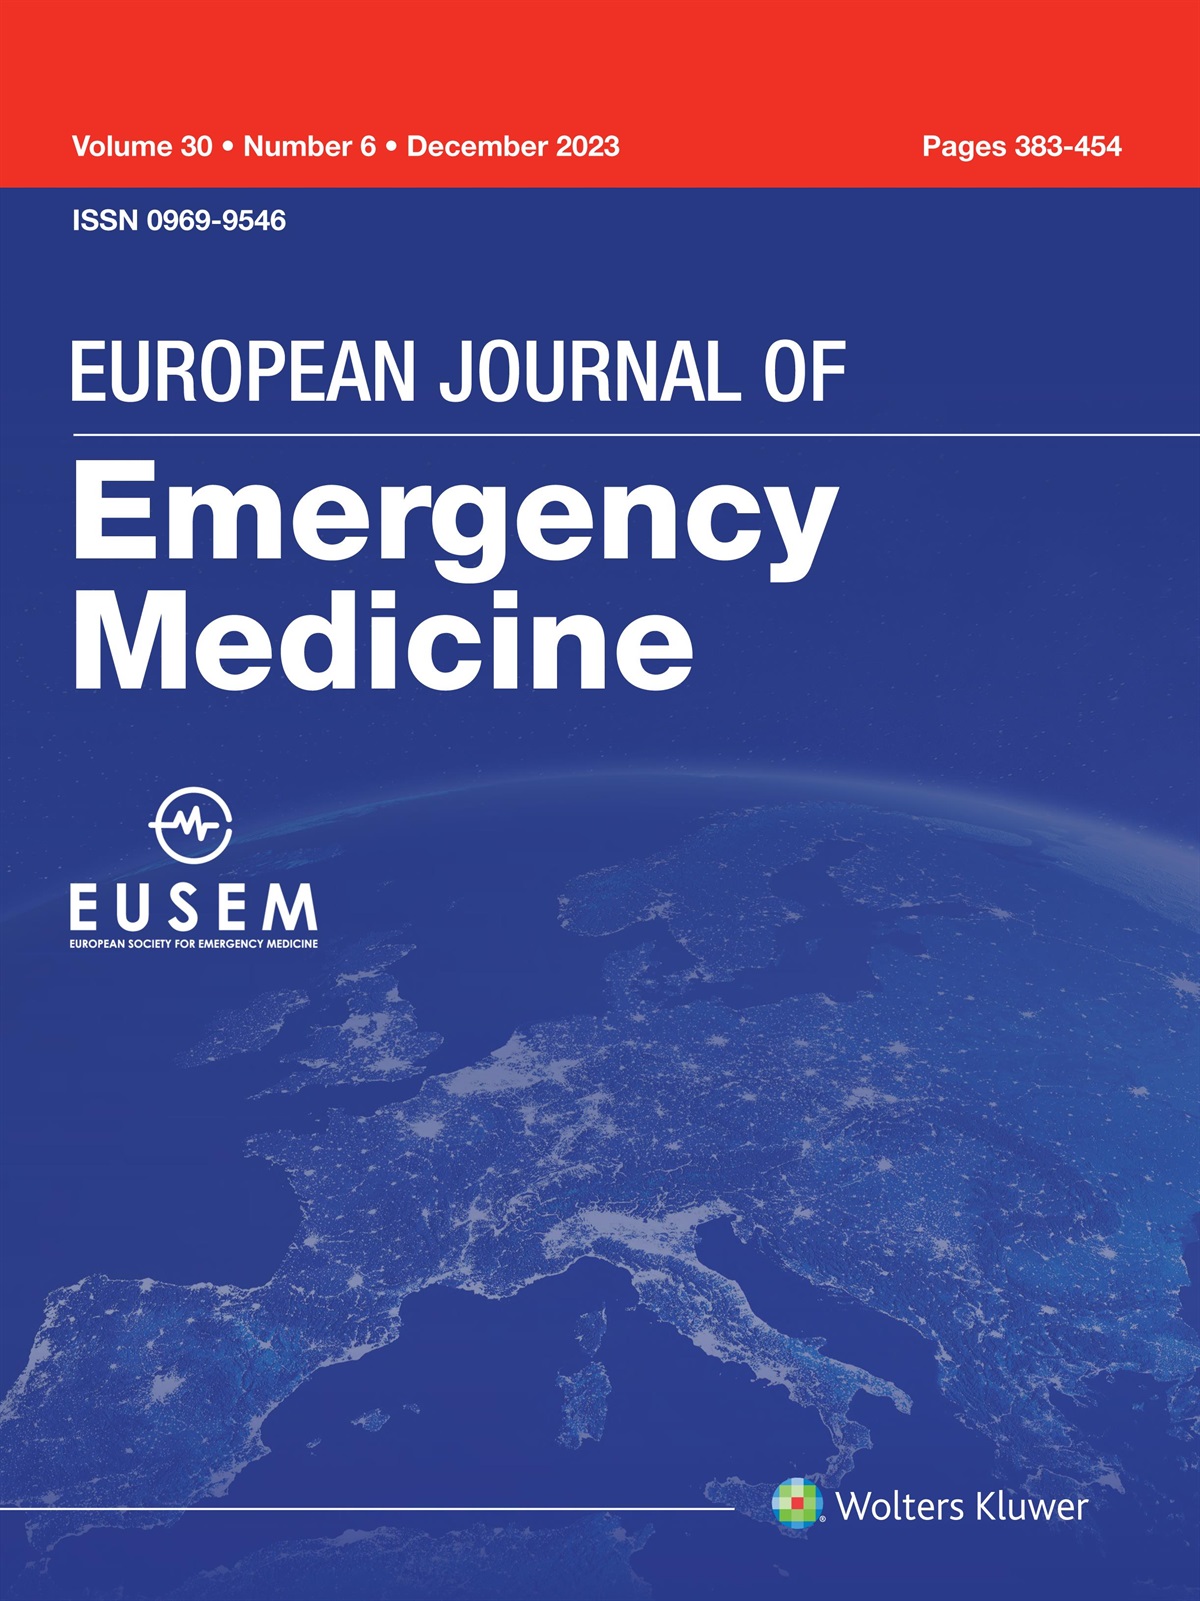 Response to ‘Identifying needs of older patients at the emergency department’